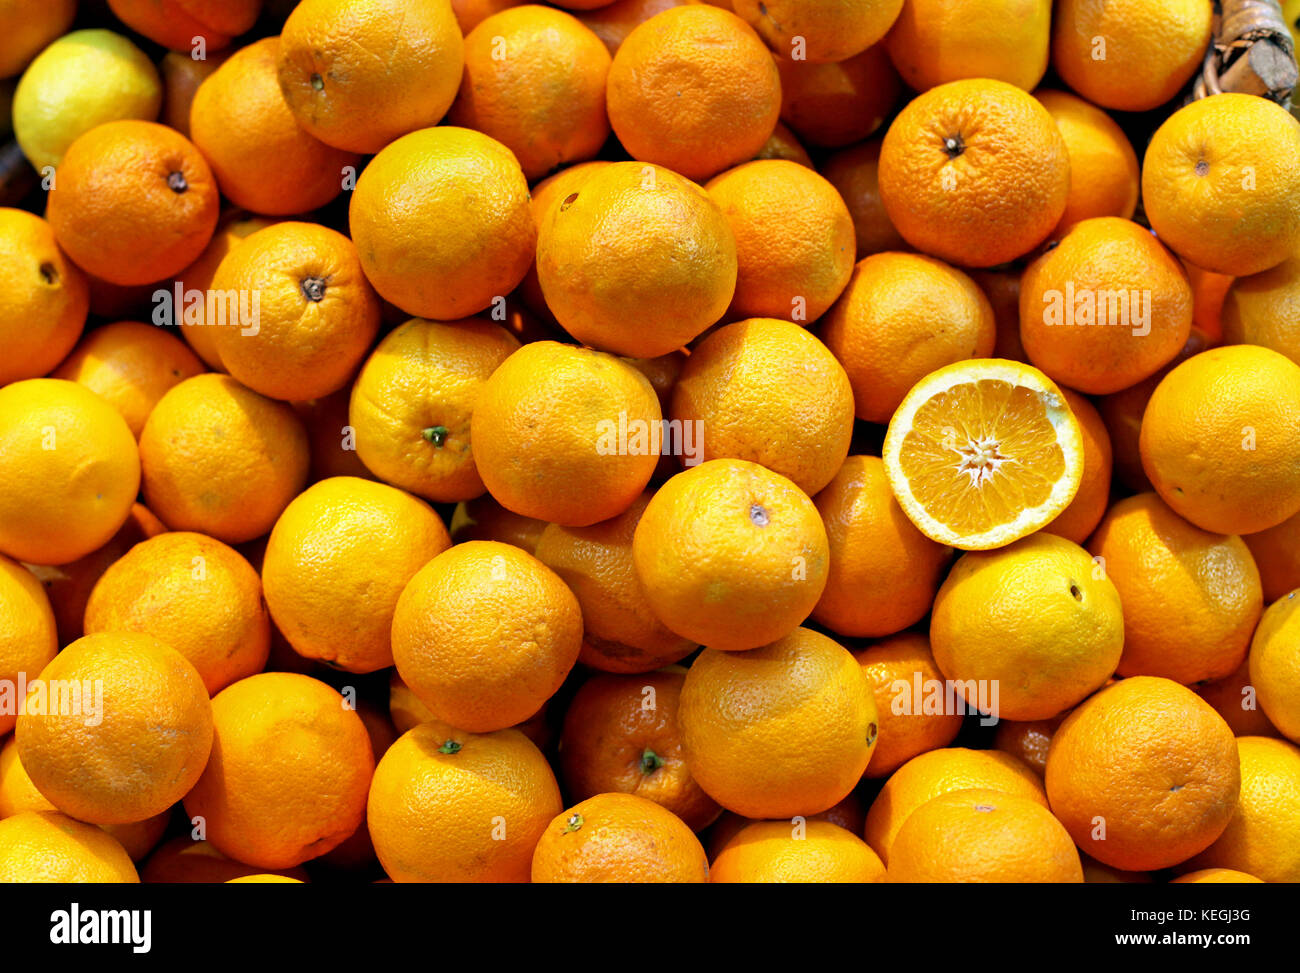 Big pile of fresh oranges with one on the top cut in half Stock Photo